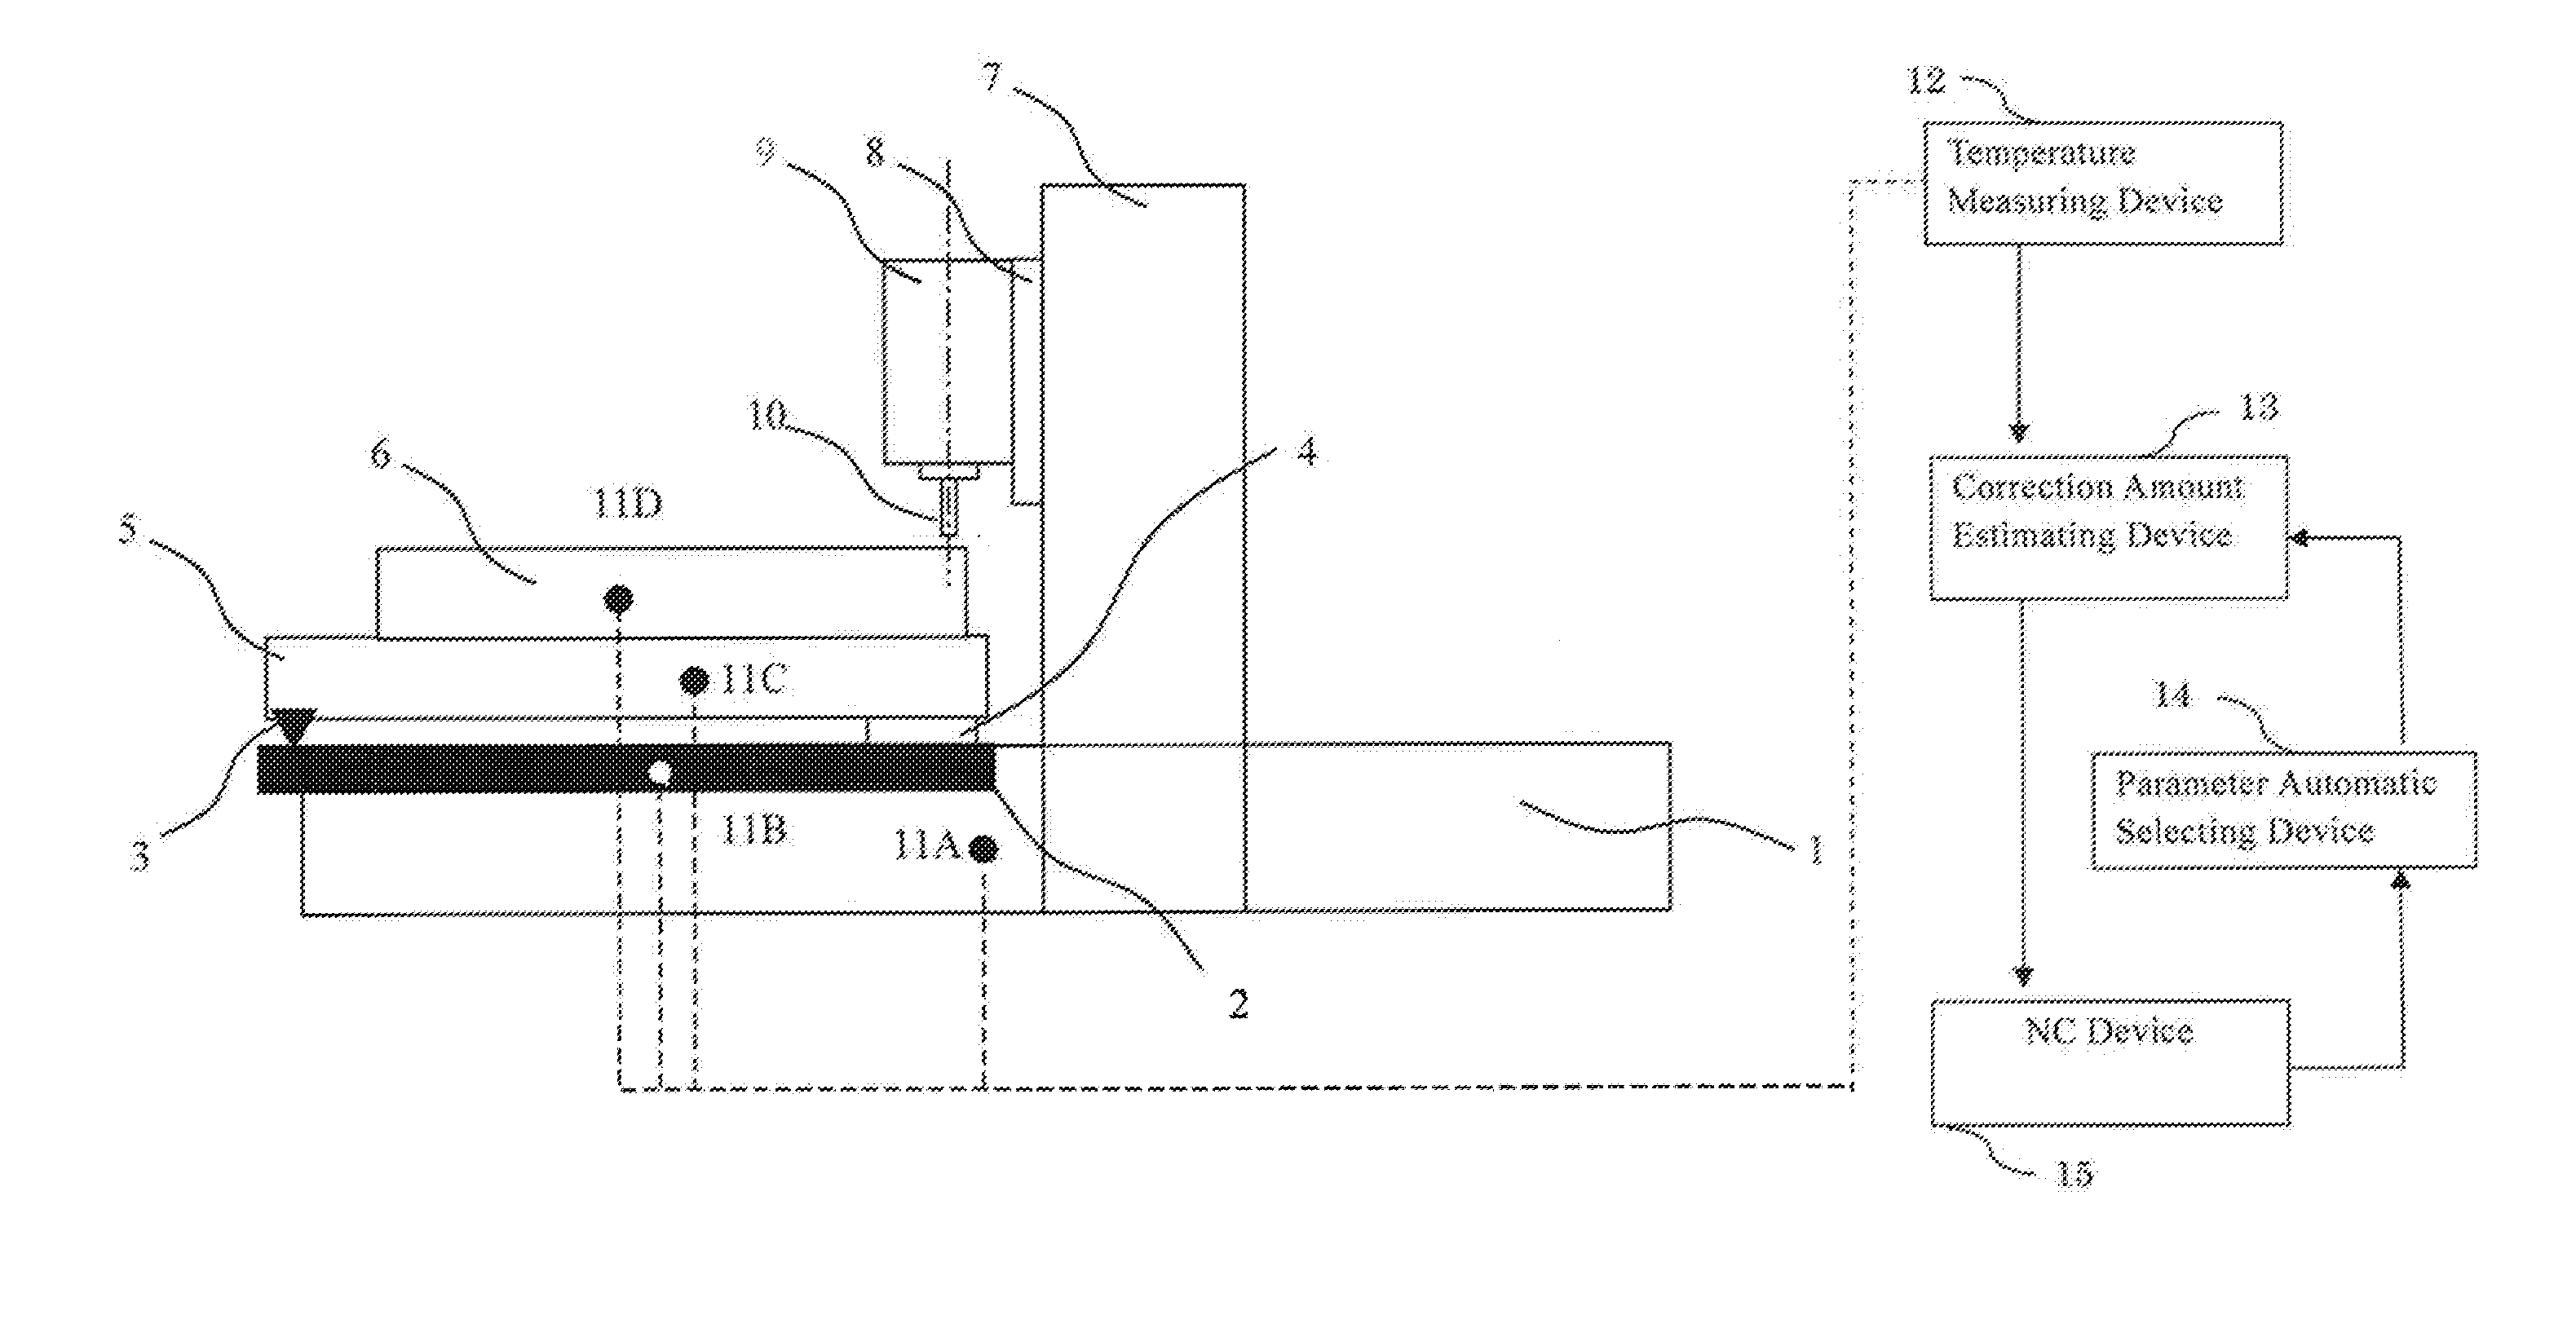 Thermal displacement correcting apparatus and method for a machine tool